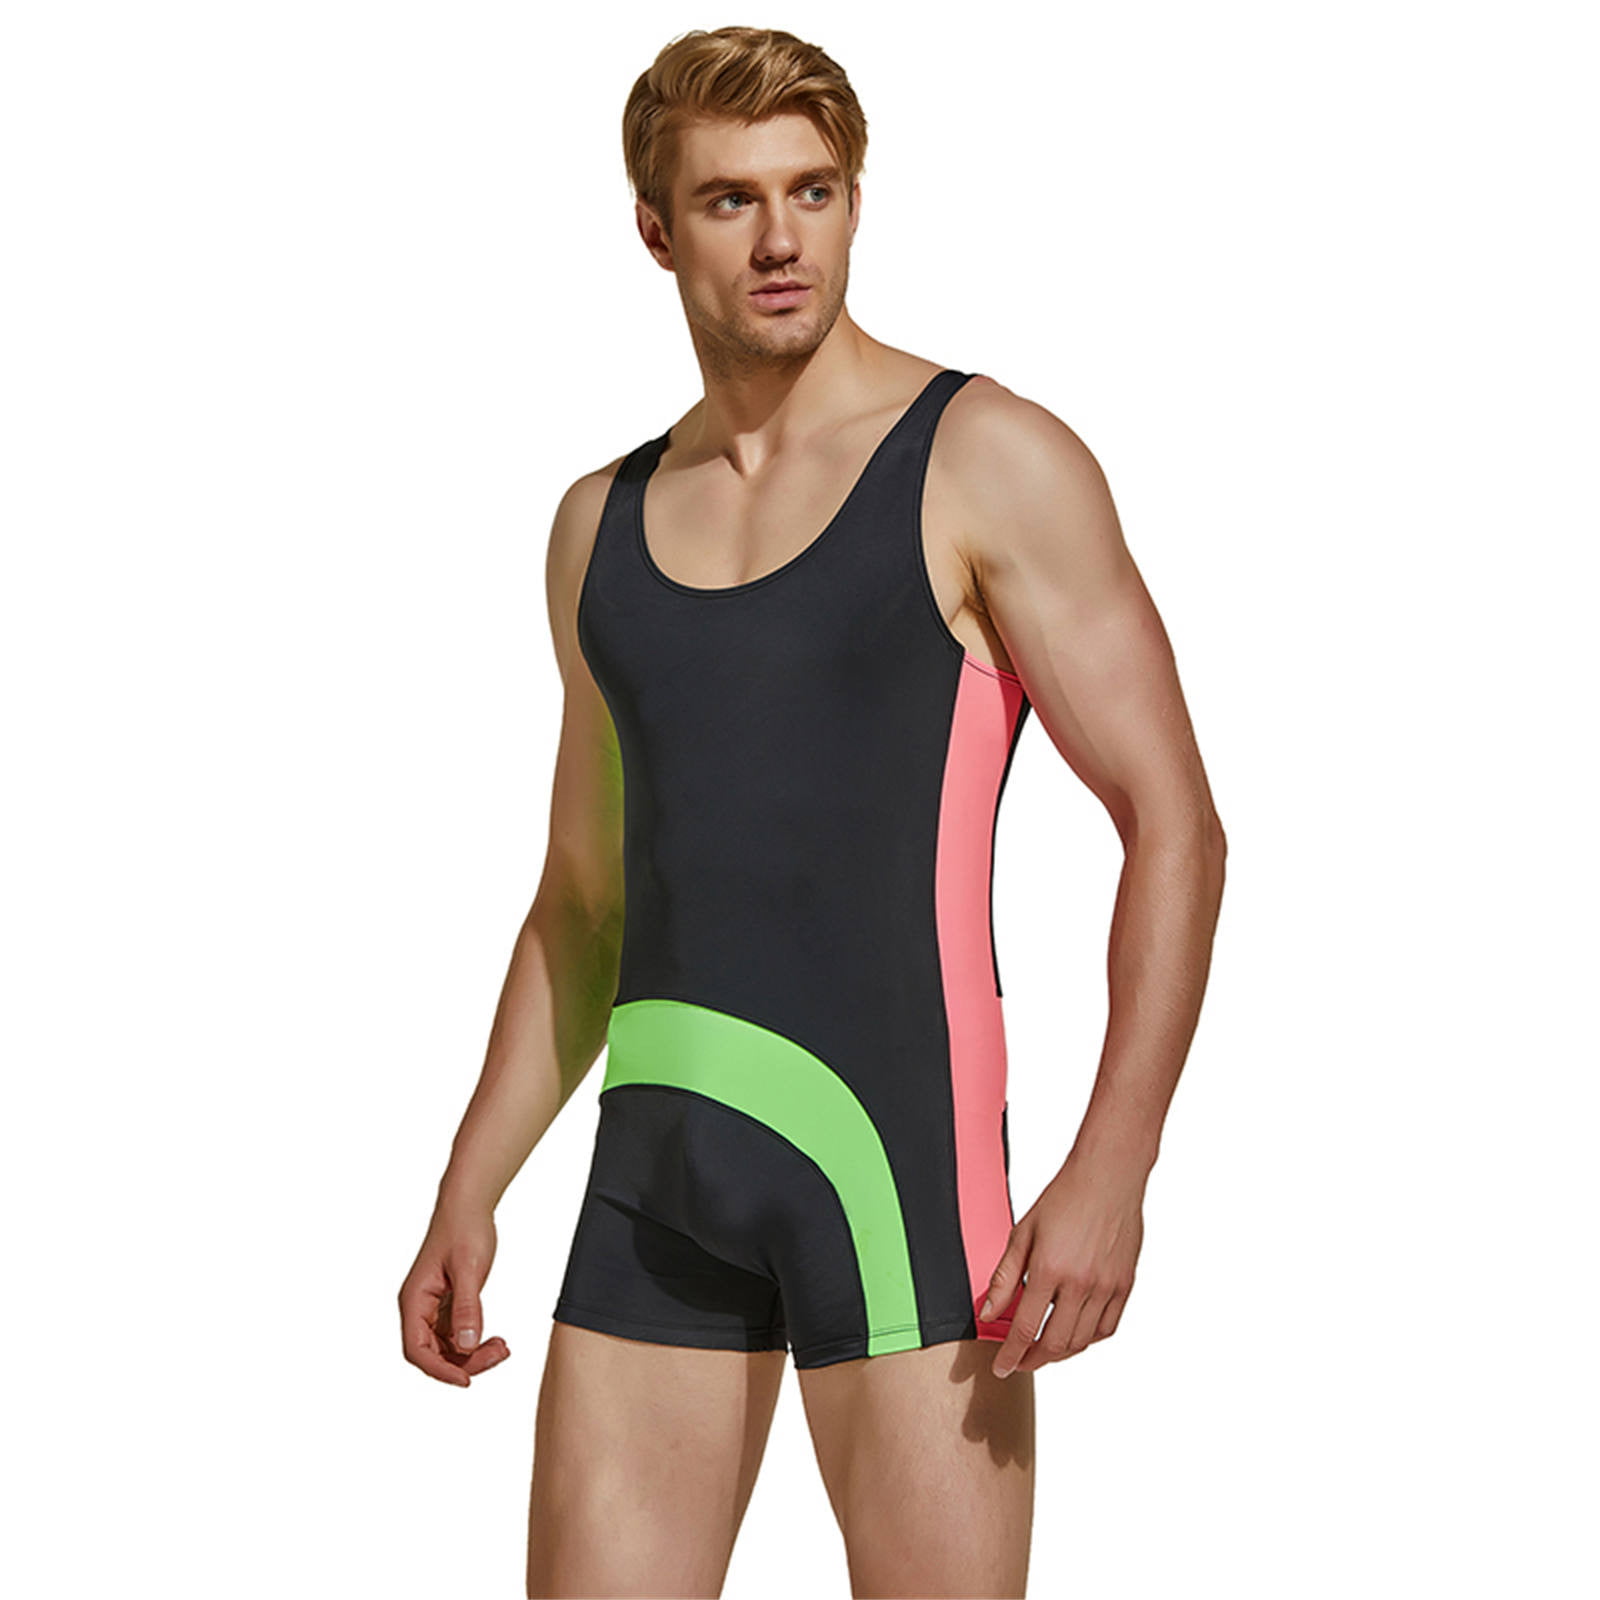 Sodopo Mens Swimsuit Male One Piece Swimwear for Men and Boys